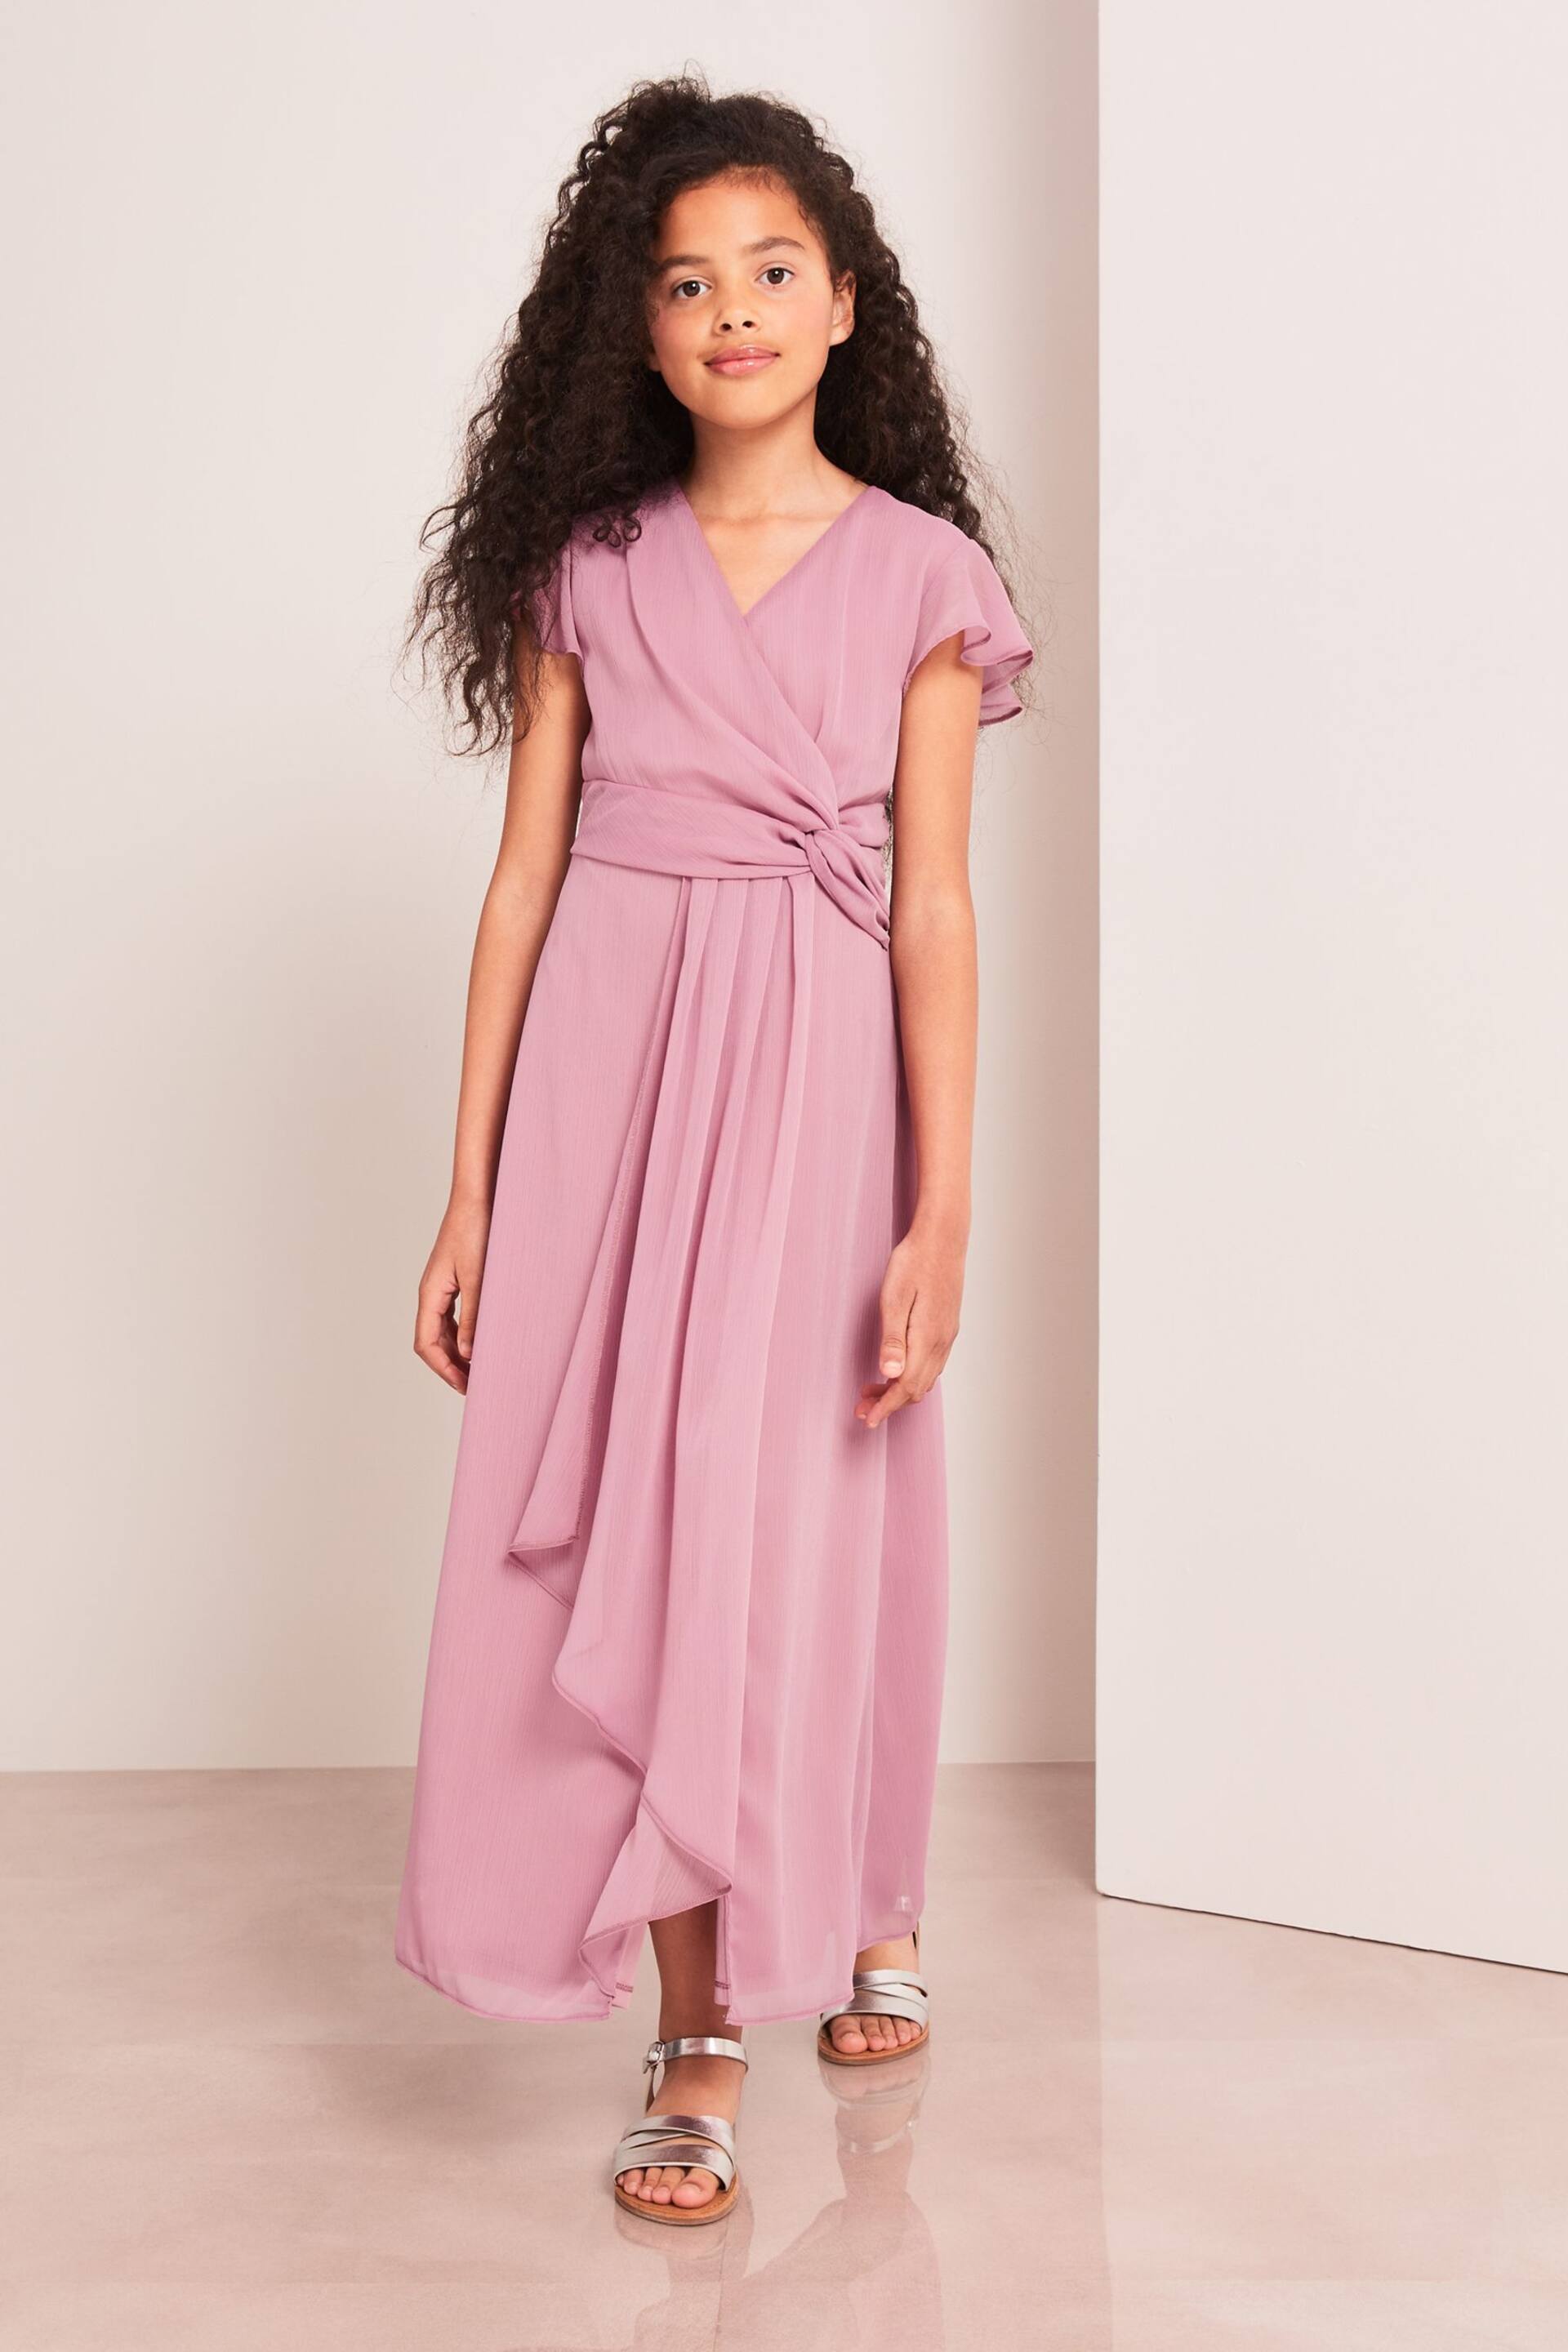 Lipsy Rose Pink Flutter Sleeve Occasion Maxi Dress - Teen - Image 1 of 4